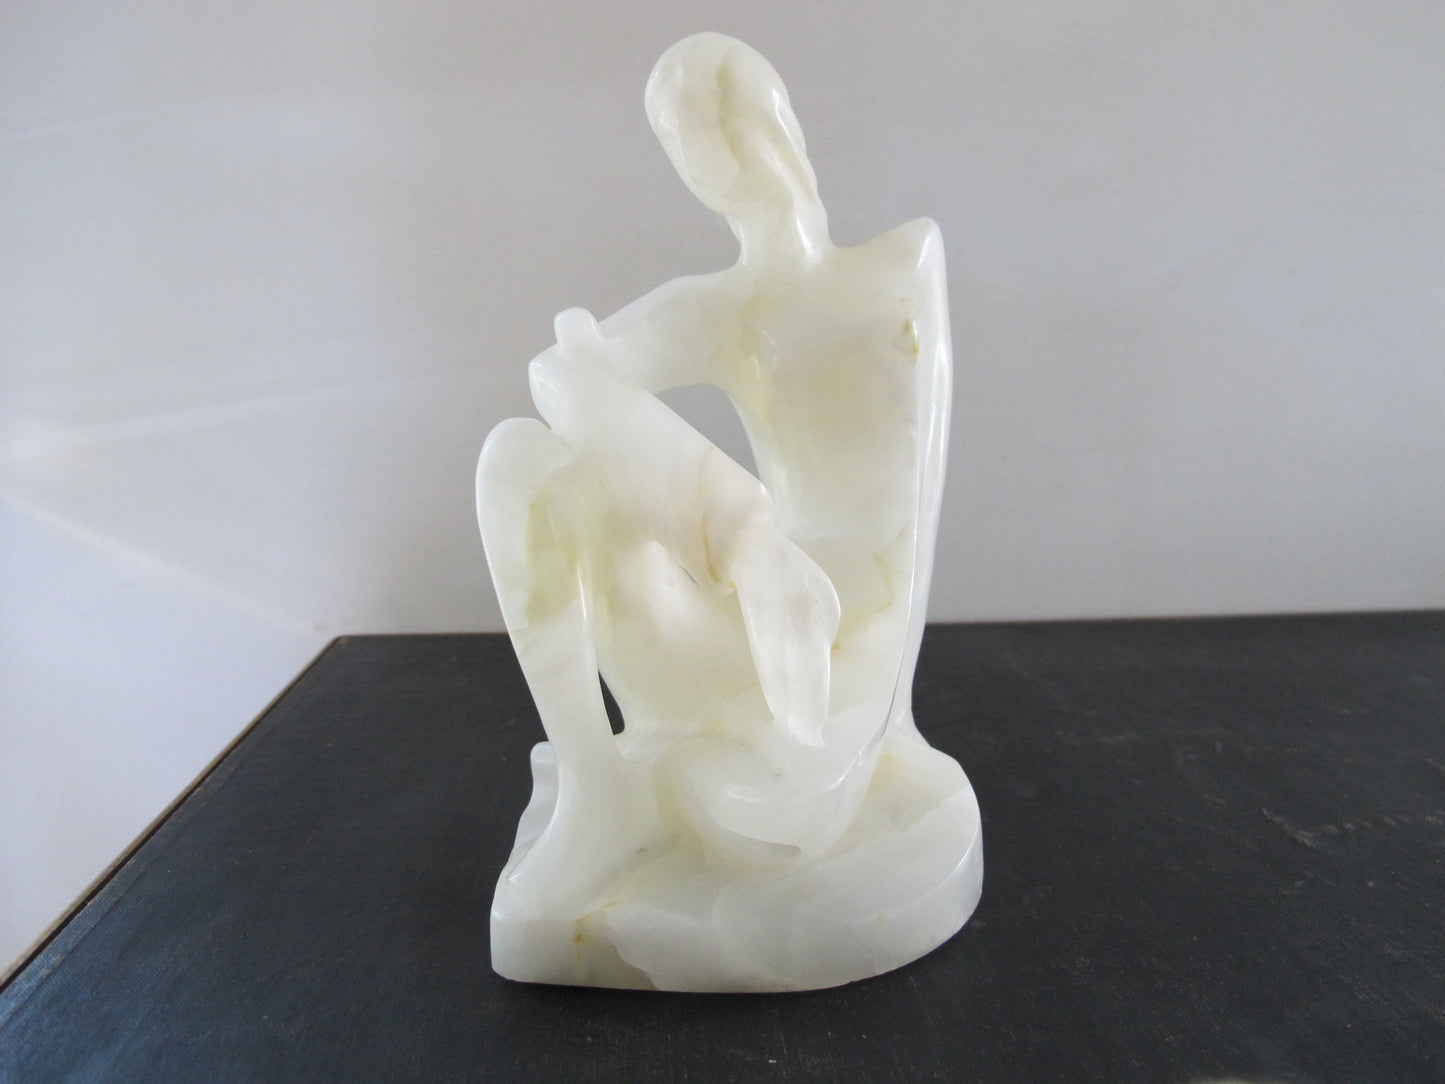 Sculpture Translucent White Alabaster Marble MCM Midcentury Italian Woman Abstract 1950s 1960s